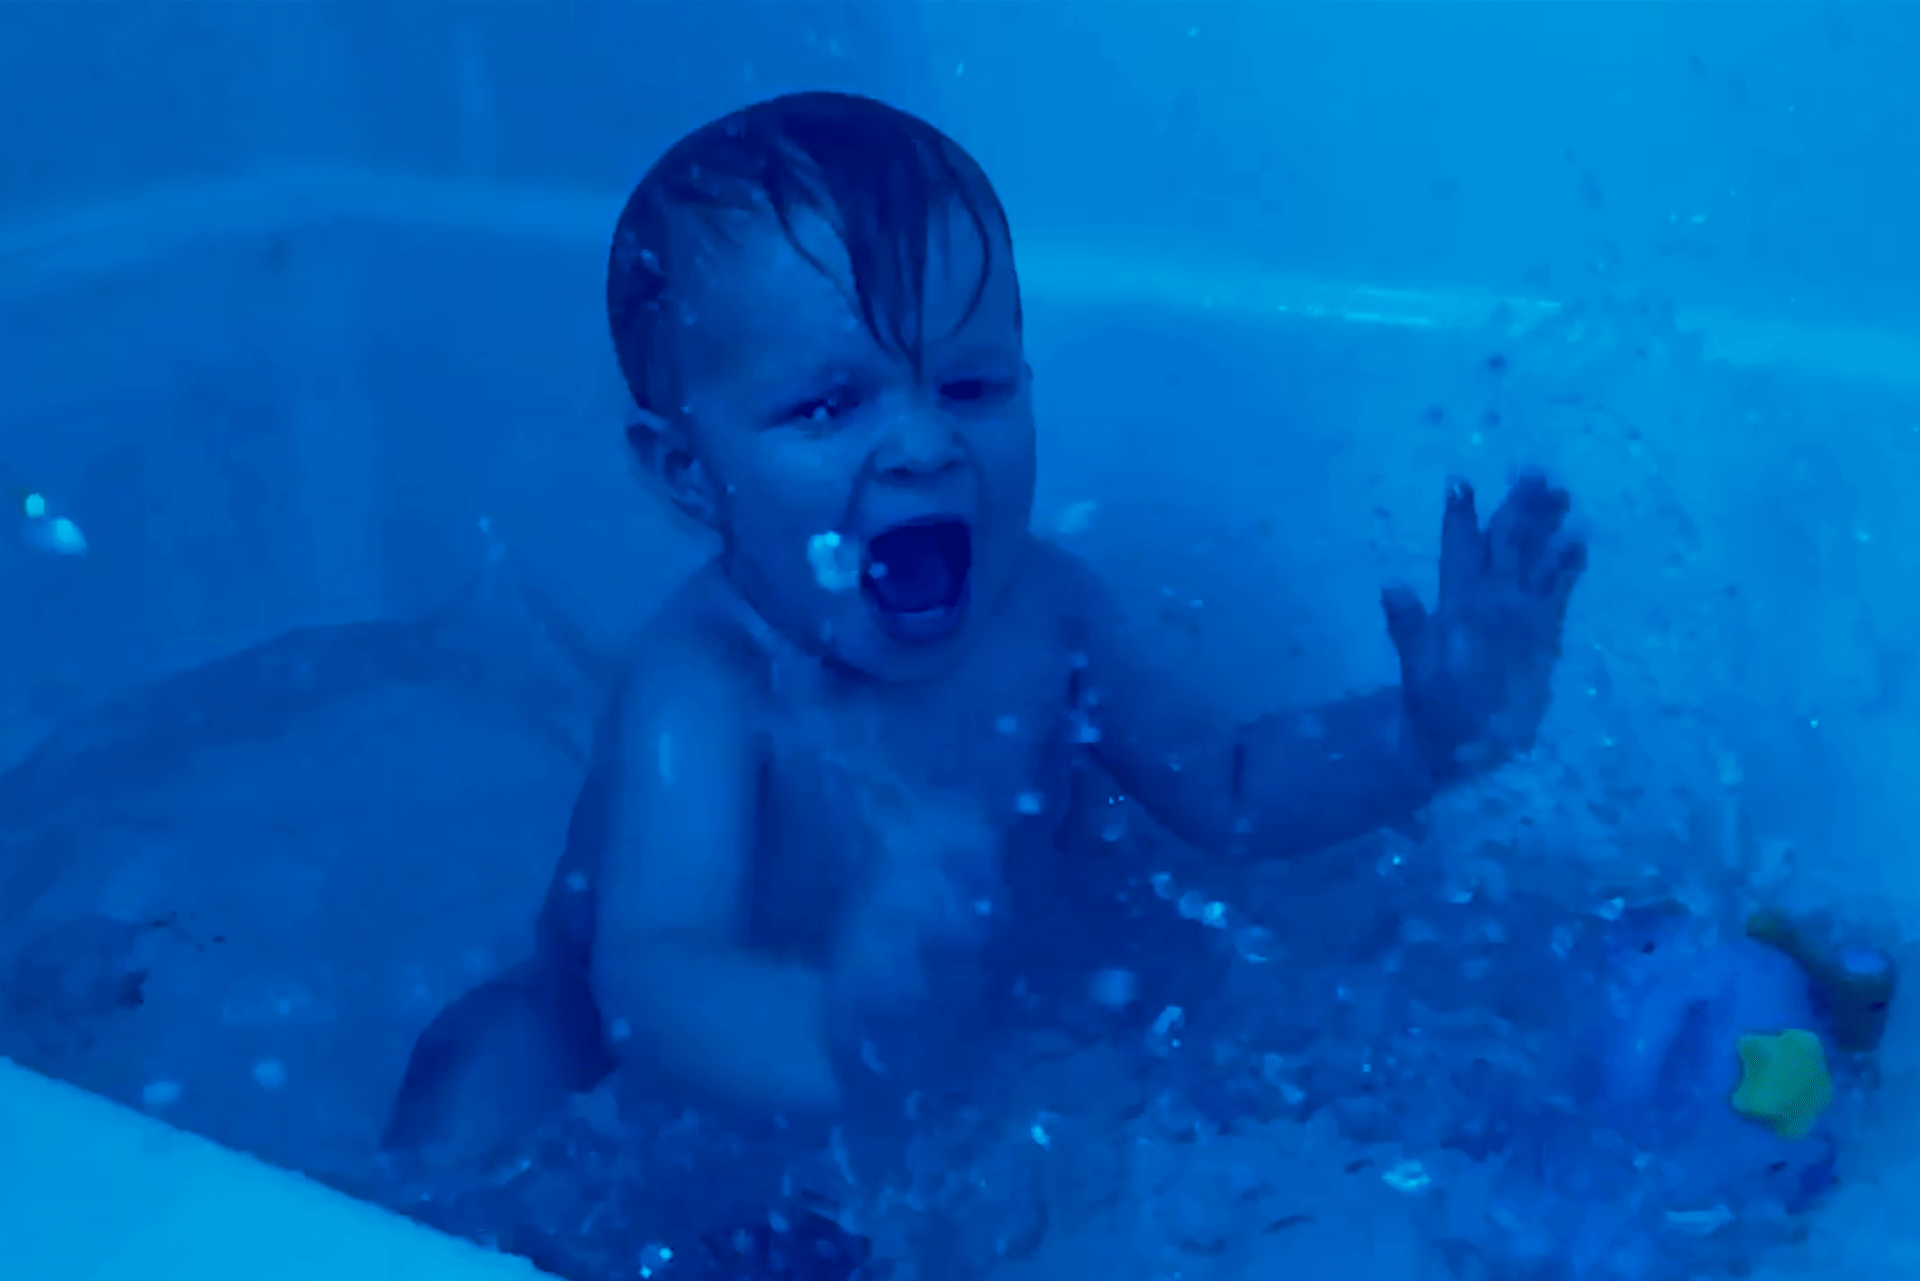 Blue haze over a video of  a young child splashing in the bath